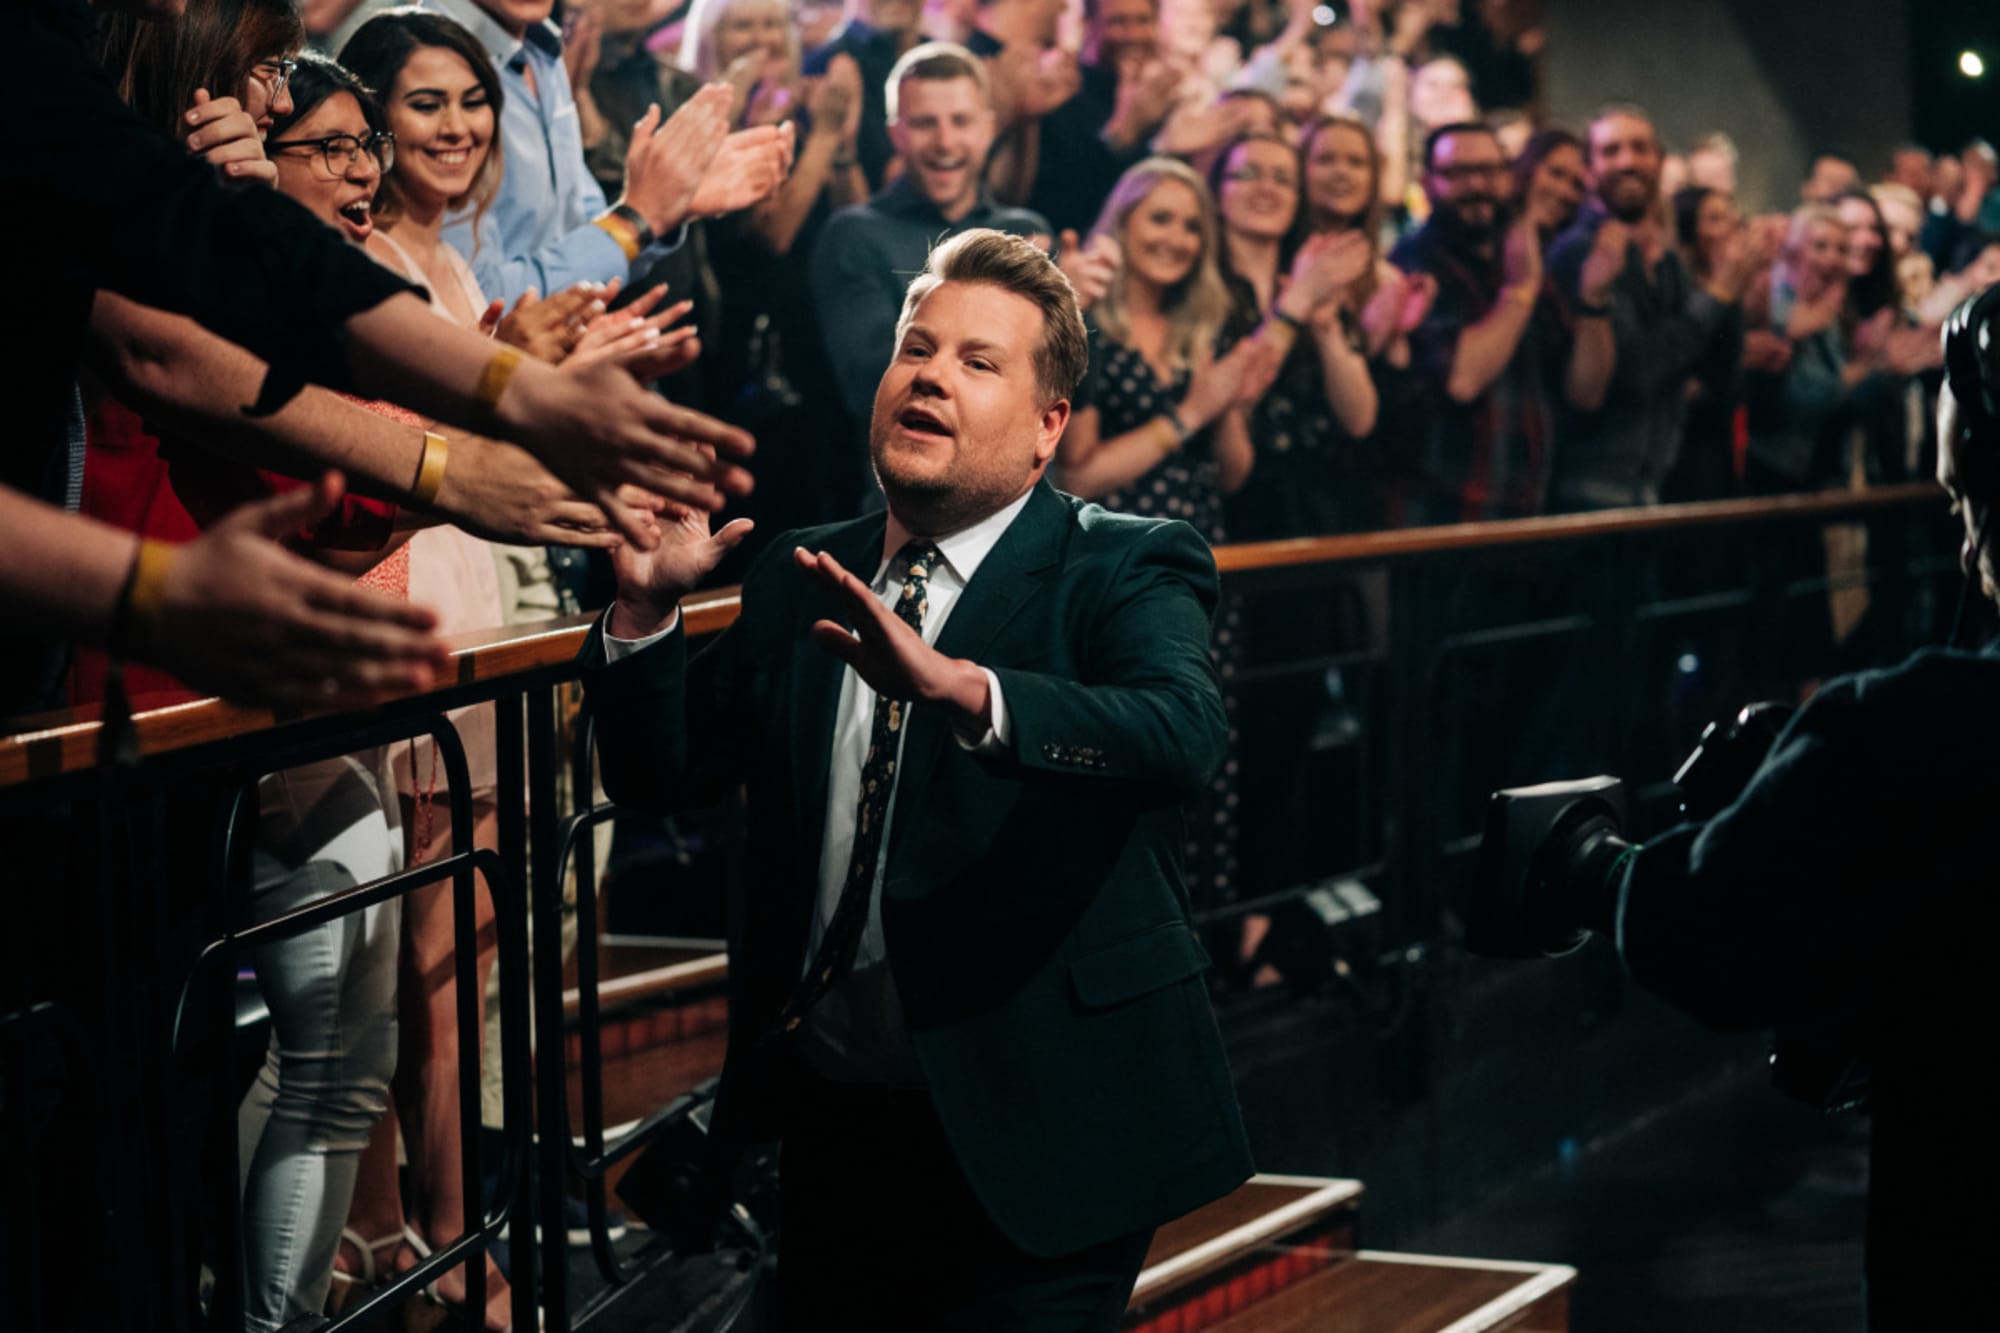 James Corden gets allstar lineup of guest hosts for The Late Late Show